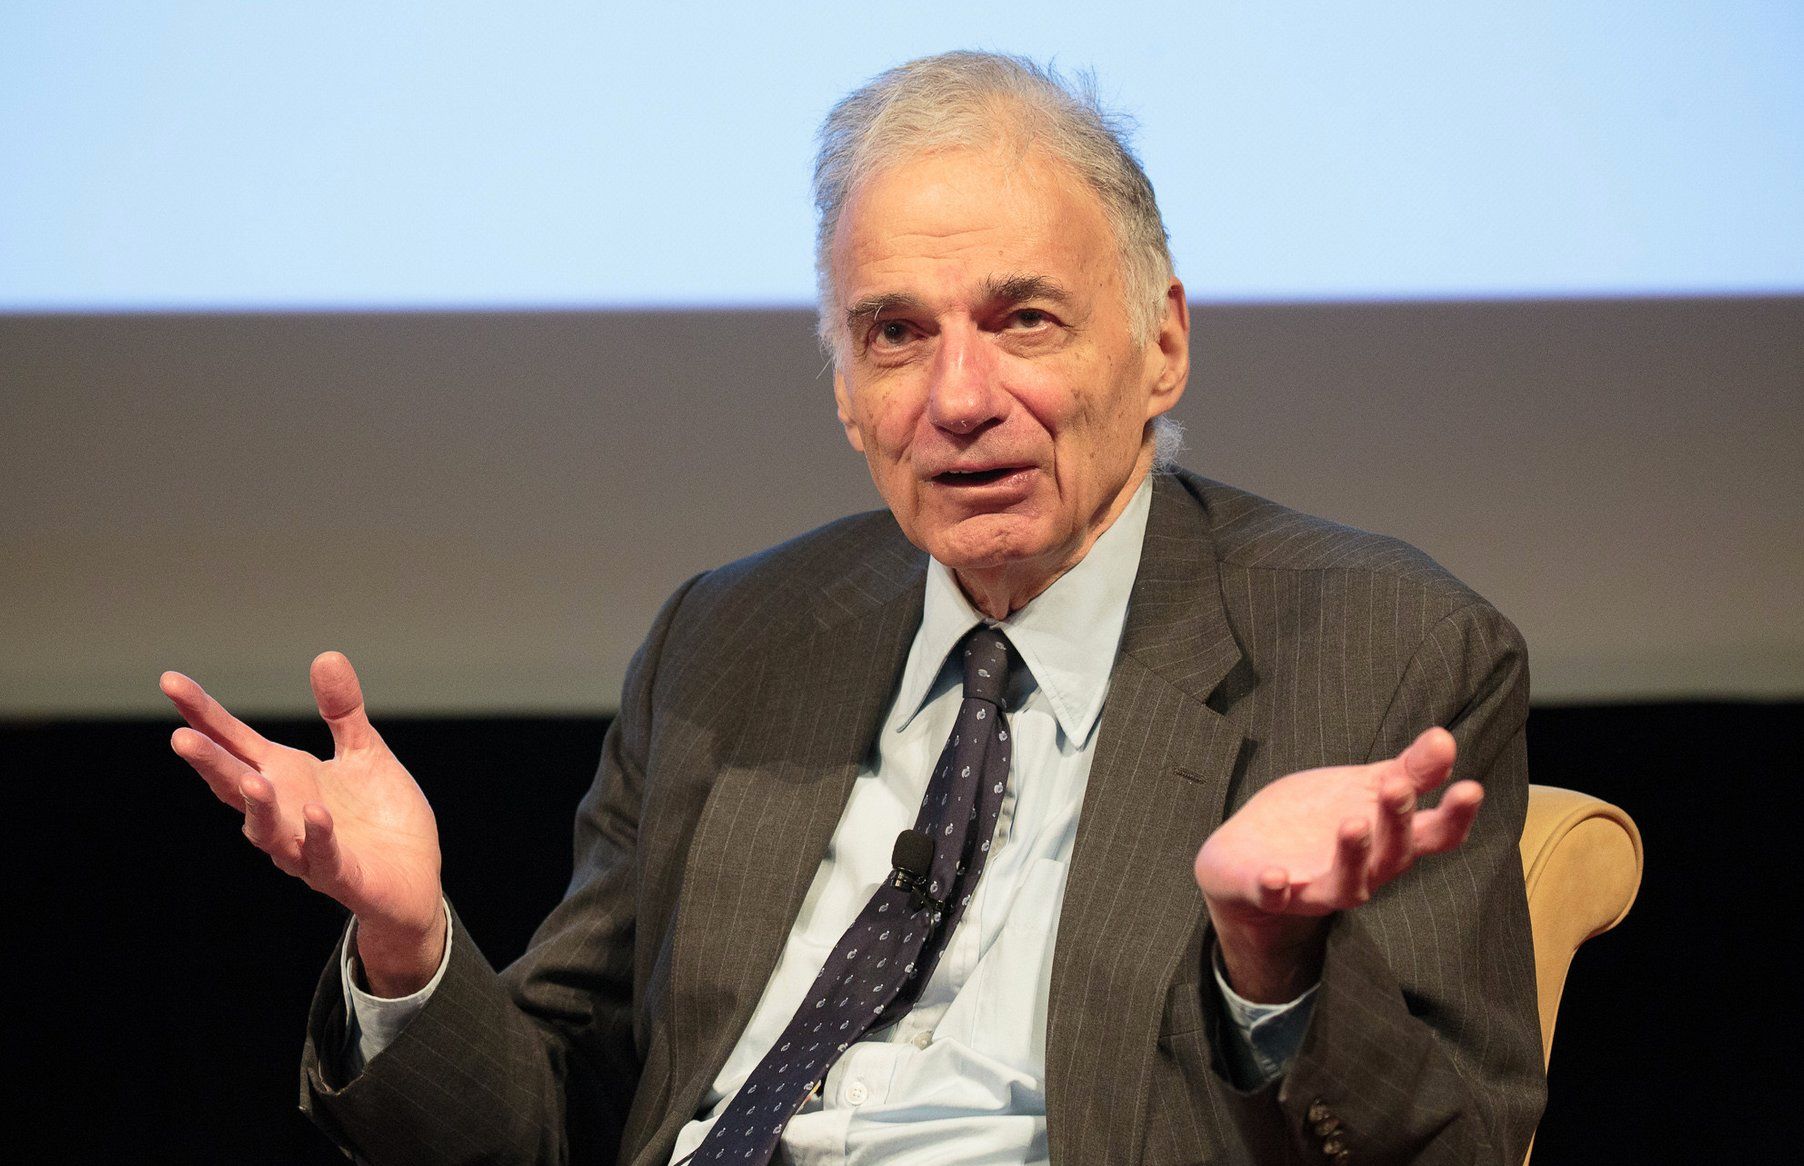 Ralph Nader, the Unsafe At Any Speed Book Author 